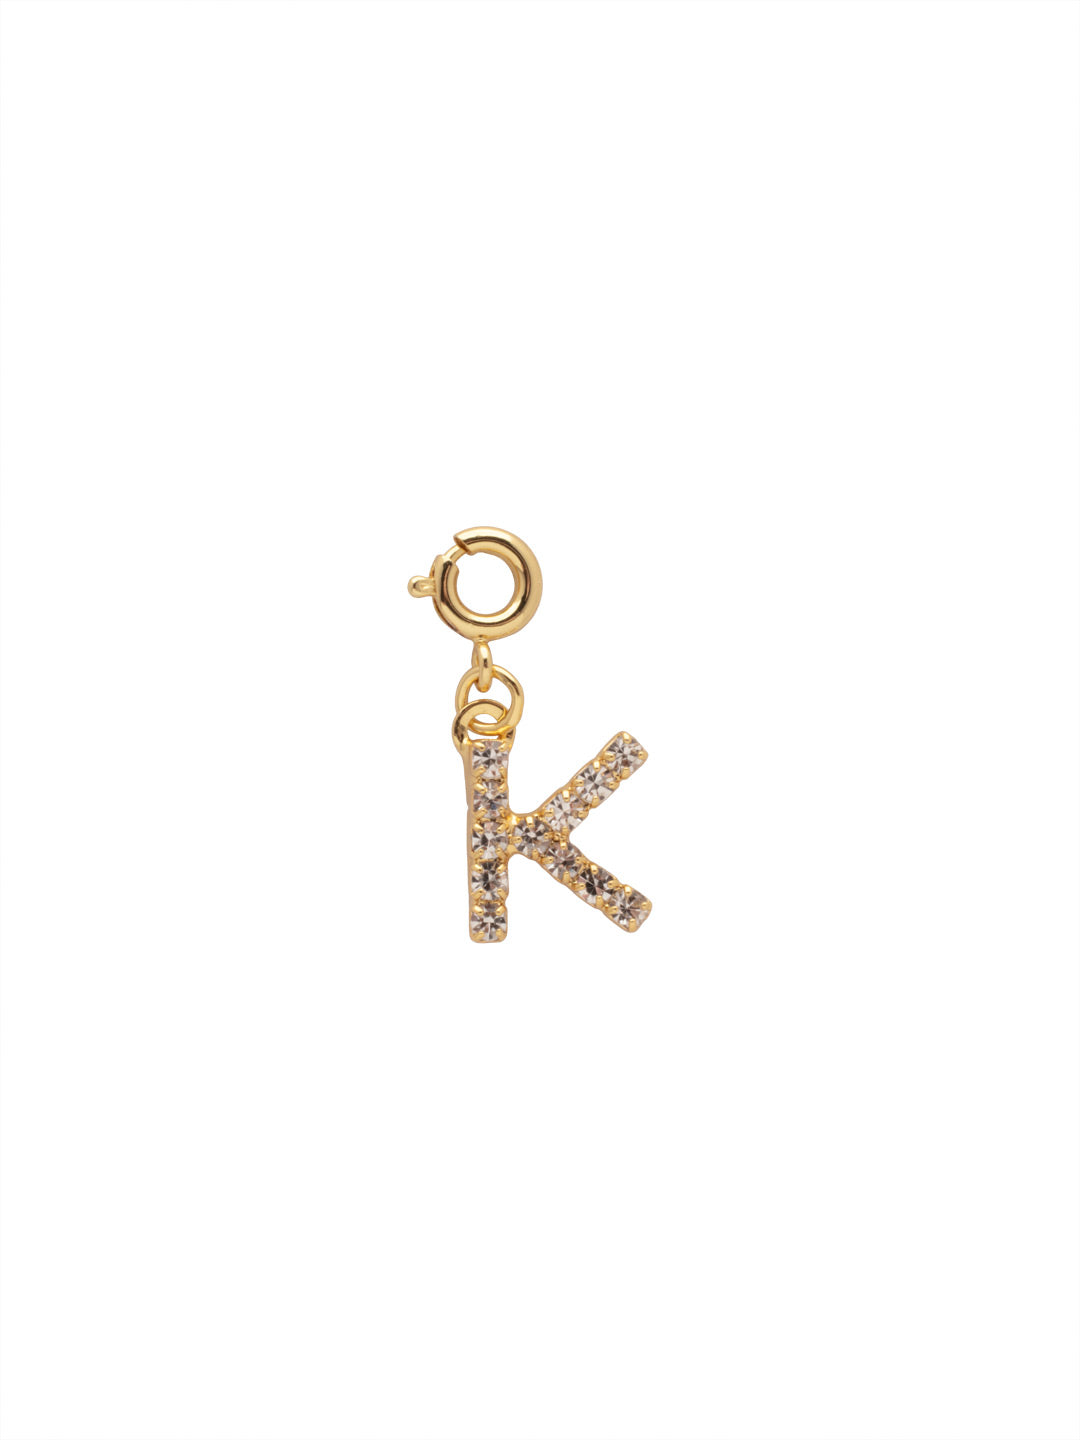 "K" Initial Charm - CFB11BGCRY - <p>The Initial Charm features a metal letter embellished with small round crystals and a small spring ring clasp. From Sorrelli's Crystal collection in our Bright Gold-tone finish.</p>